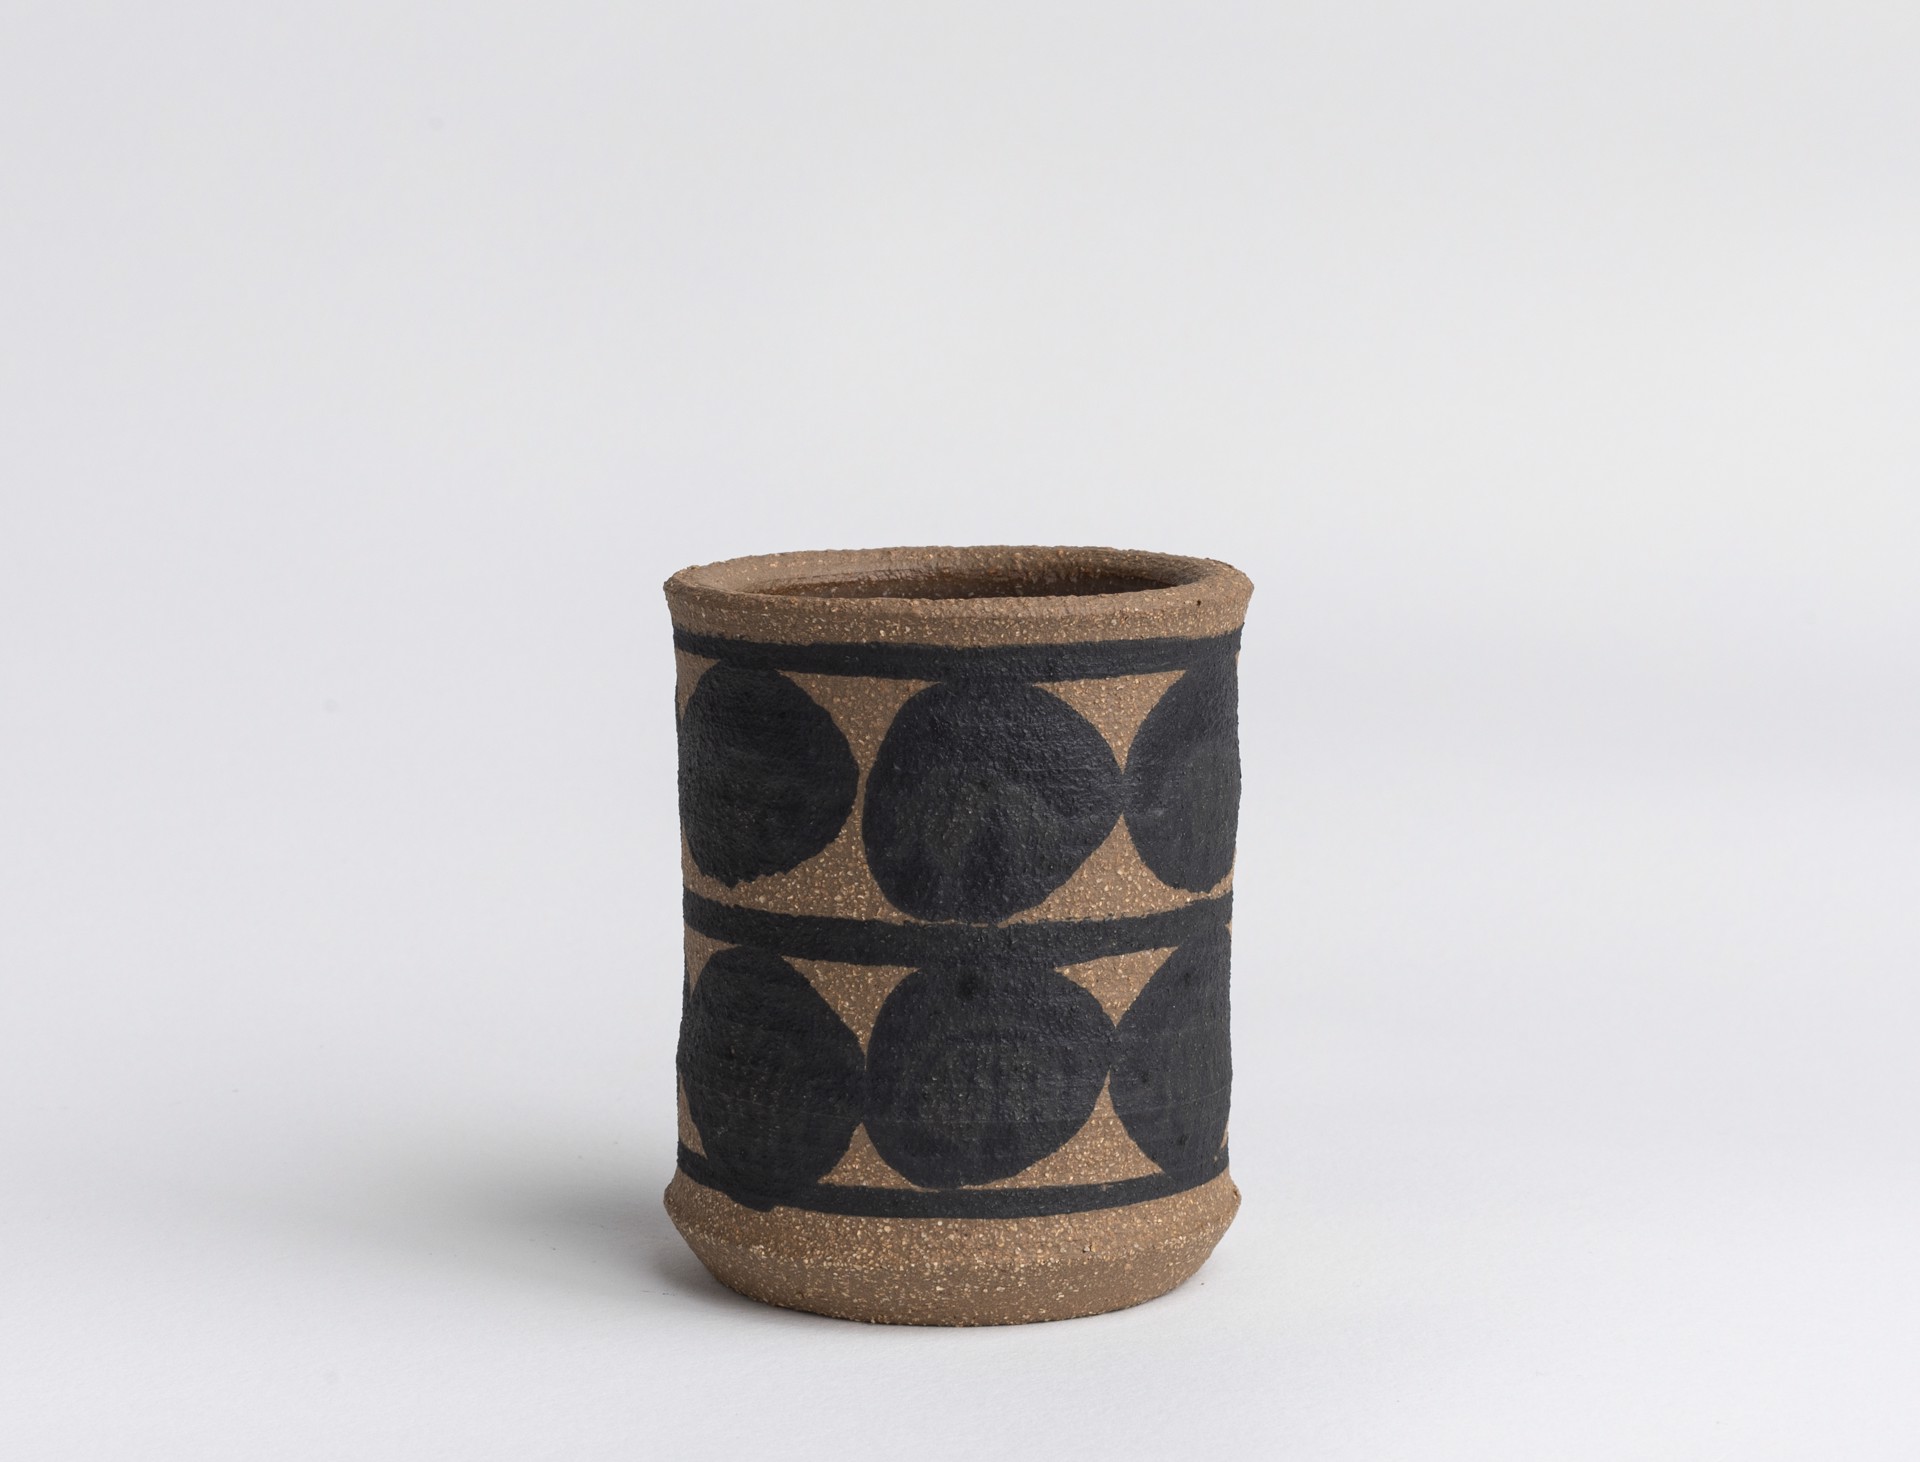 Black Patterned Cup/Vase II by Glory Day Loflin Ceramics